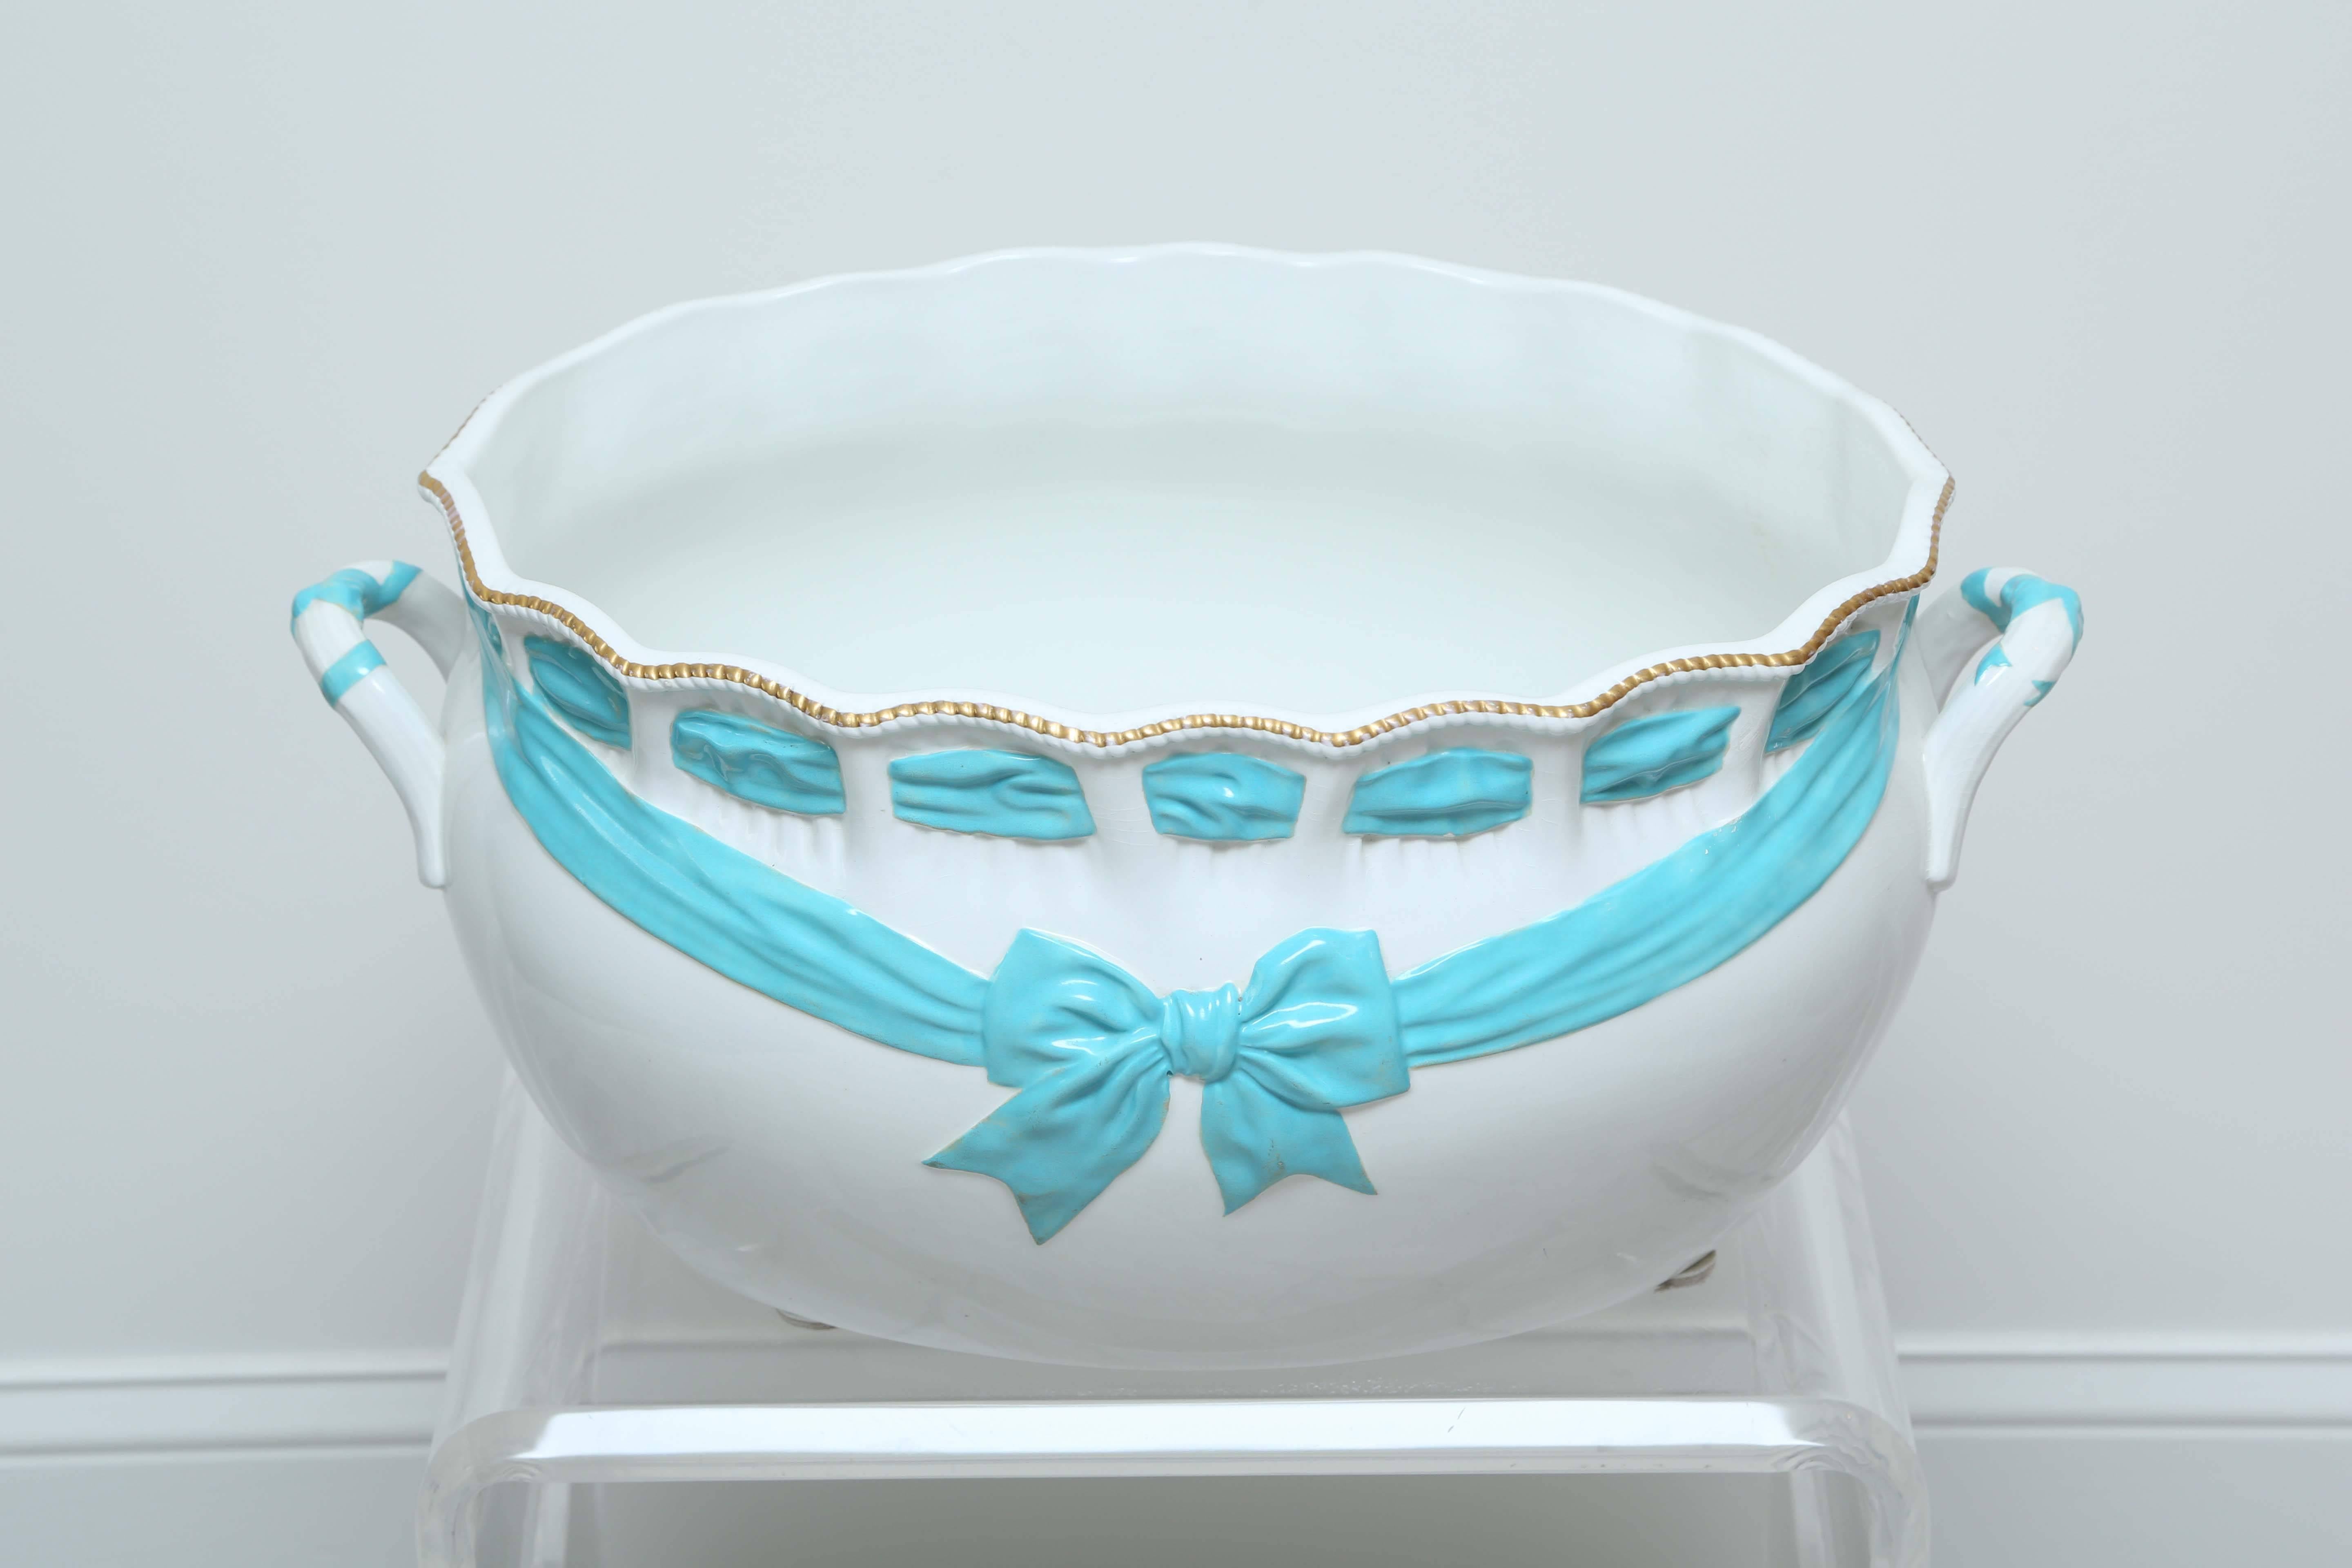 Charming white porcelain footbath decorated with a turquoise ribbon and gold beads.